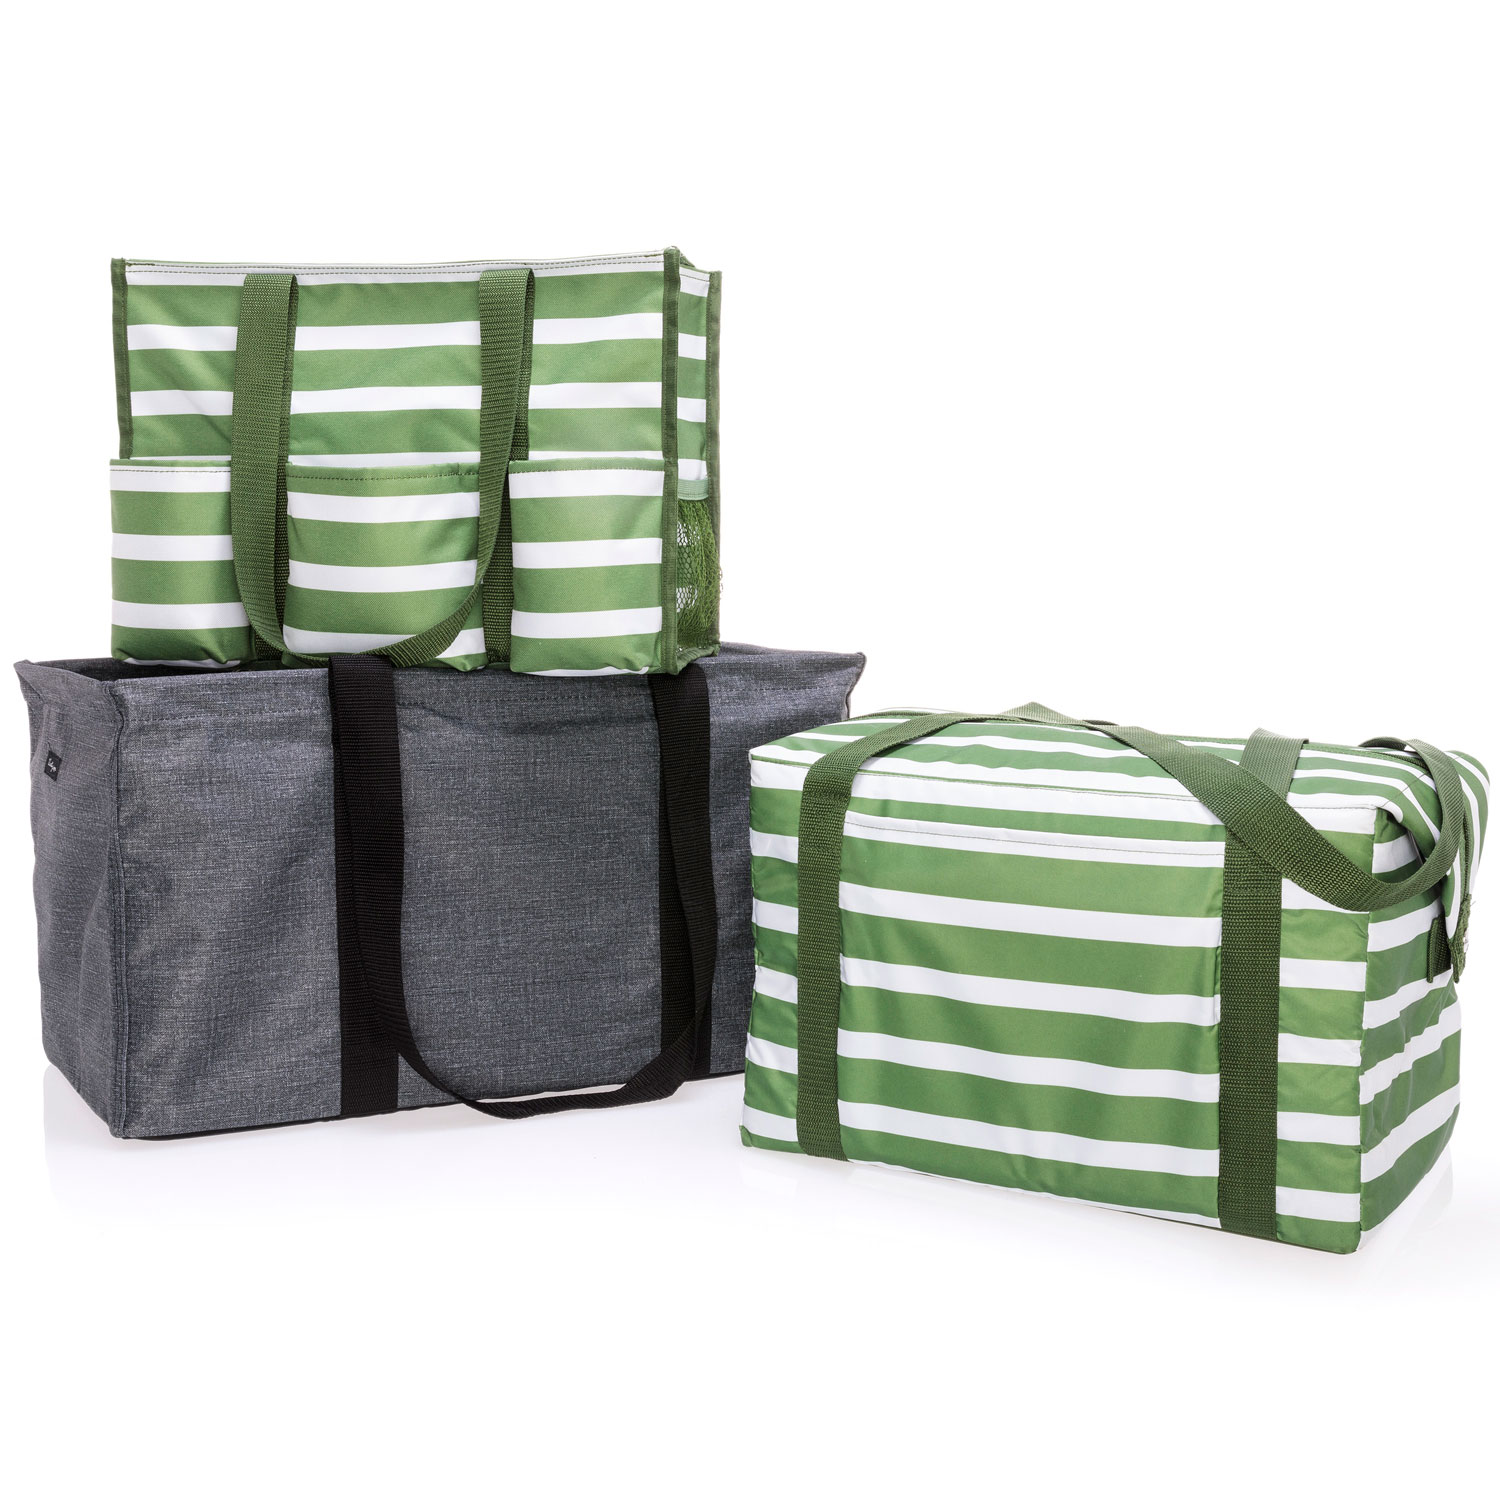 Posh Autumn Plaid - Around The Clock Thermal - Thirty-One Gifts -  Affordable Purses, Totes & Bags